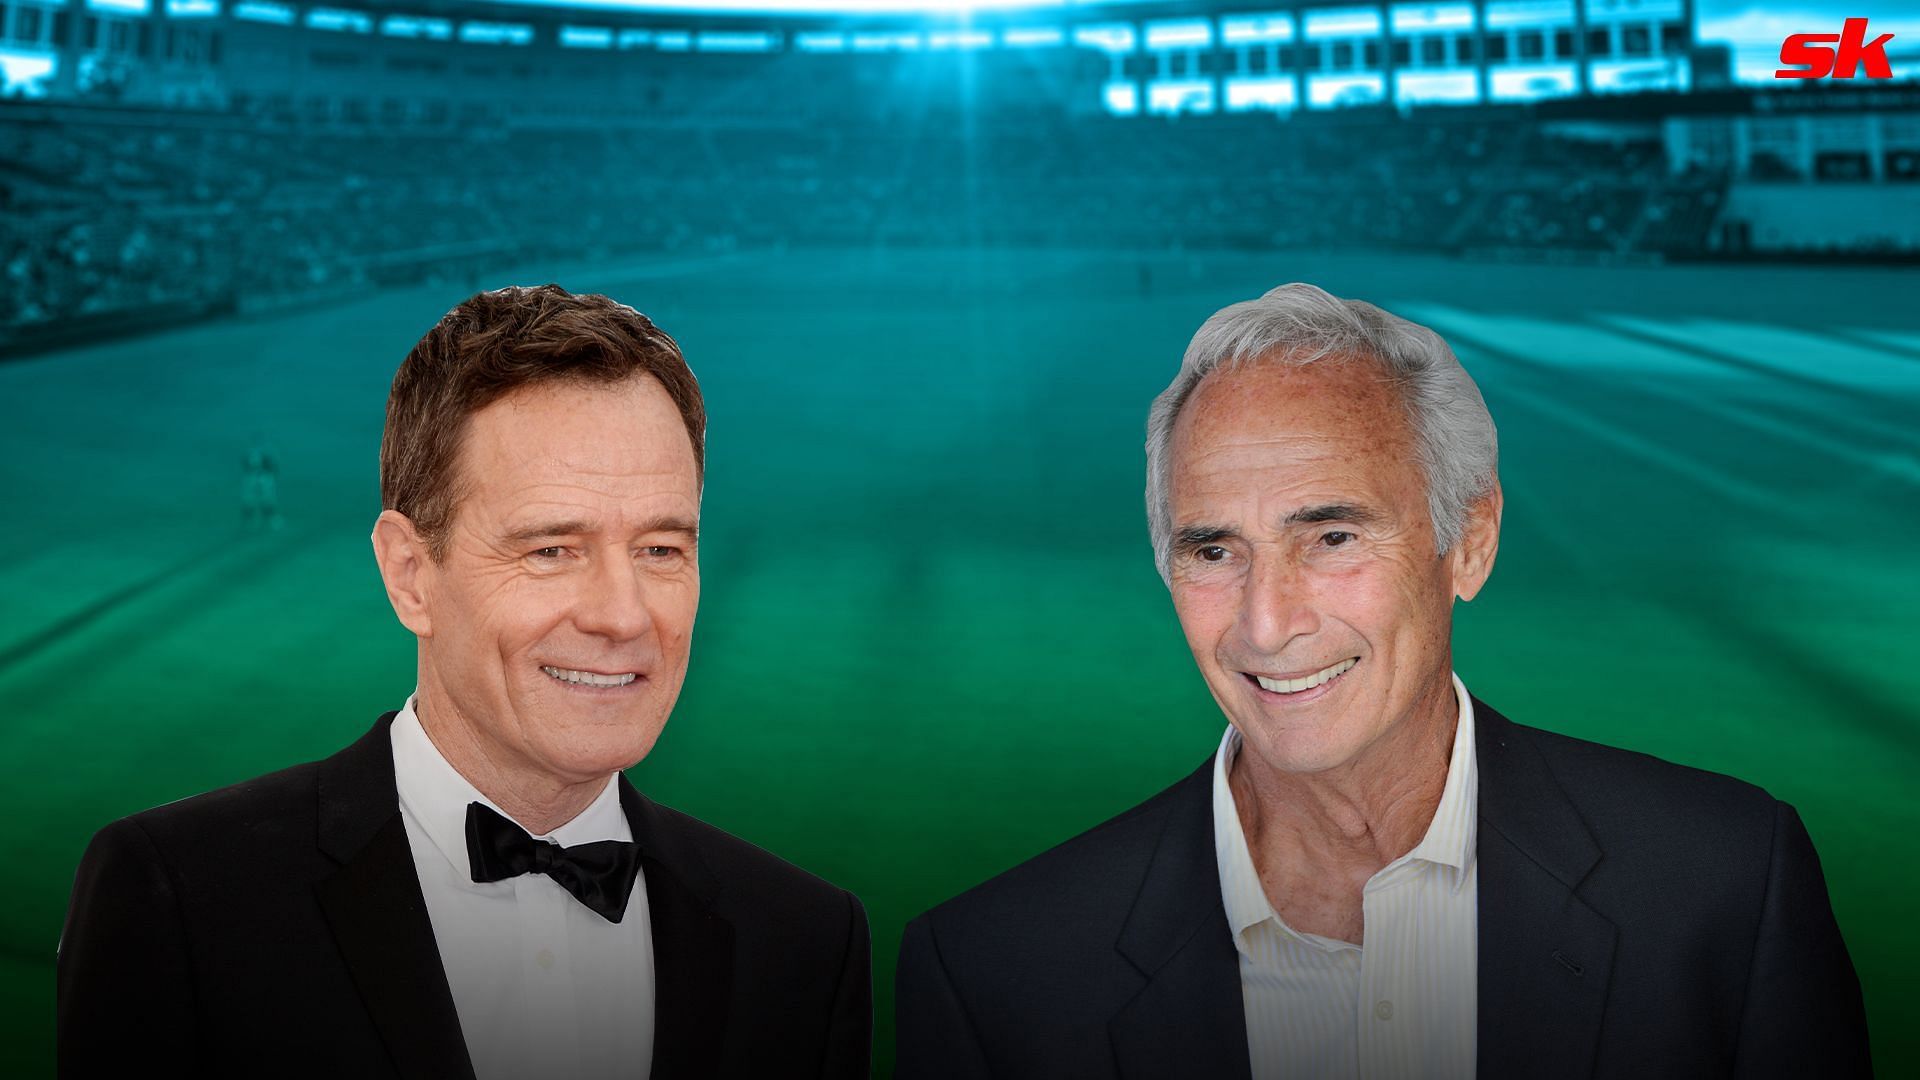 Hollywood star Bryan Cranston discloses personal favorite MLB player of all time